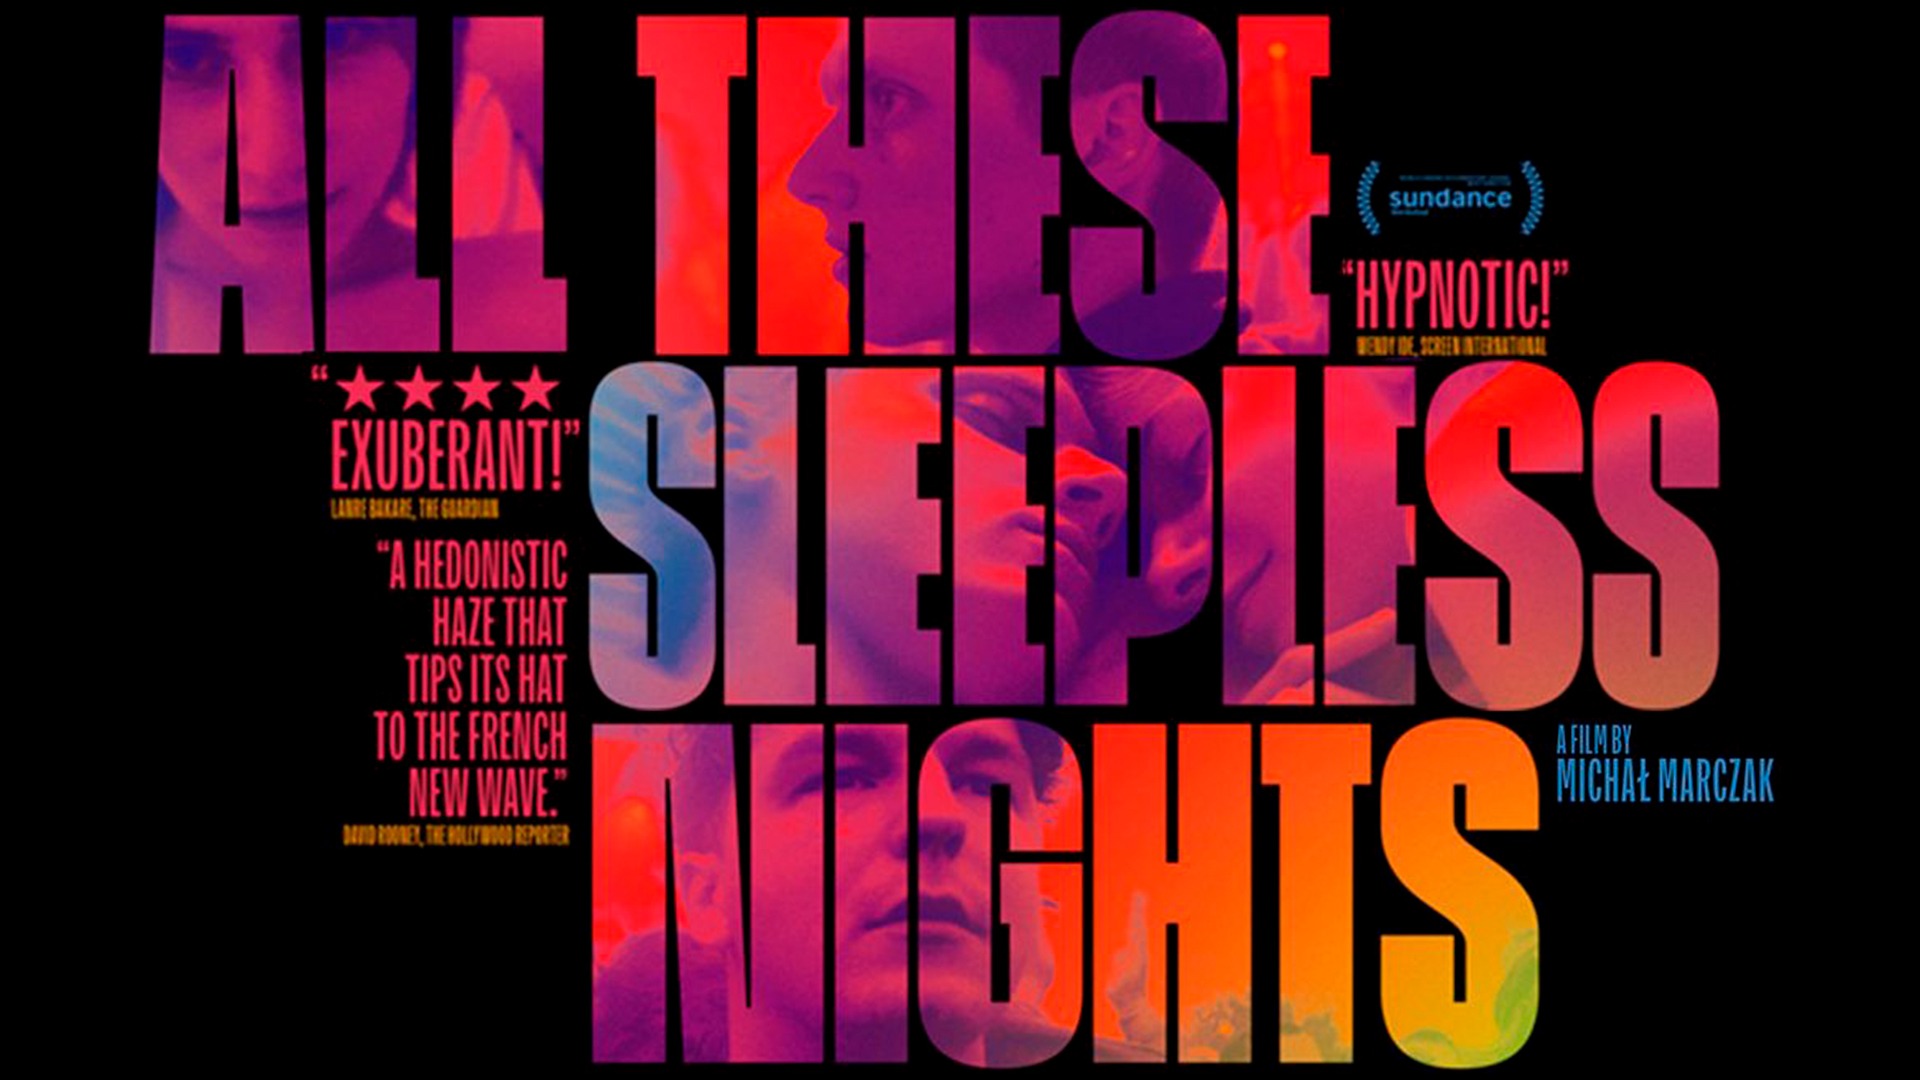 all these sleepless nights review